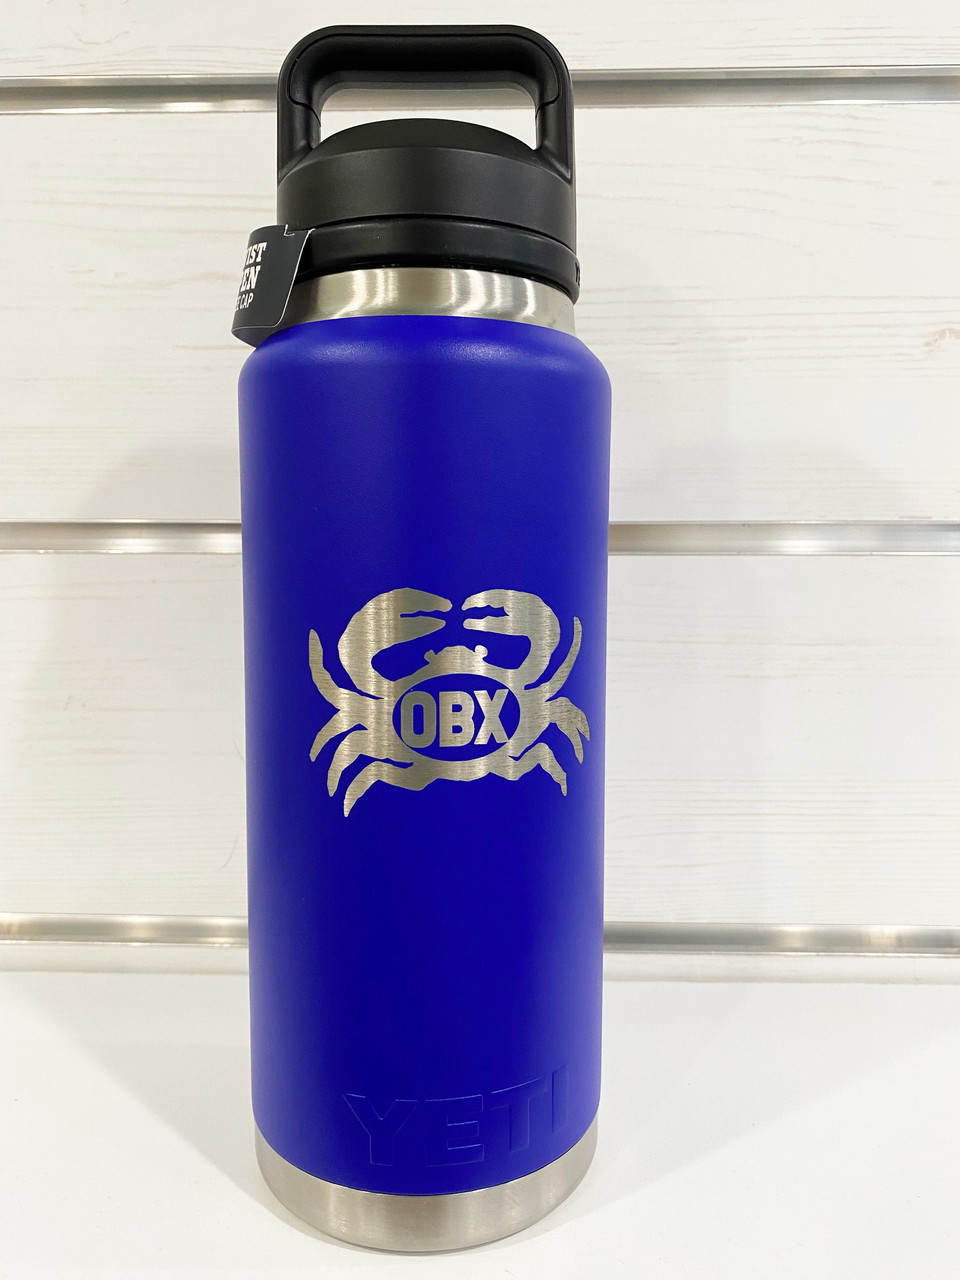 https://cdn11.bigcommerce.com/s-mdle1ql08i/images/stencil/1280x1280/products/7913/11908/custom-outer-banks-yeti-obx-crab-36-ounce-water-bottle-offshore-blue__43596.1691775147.jpg?c=2?imbypass=on